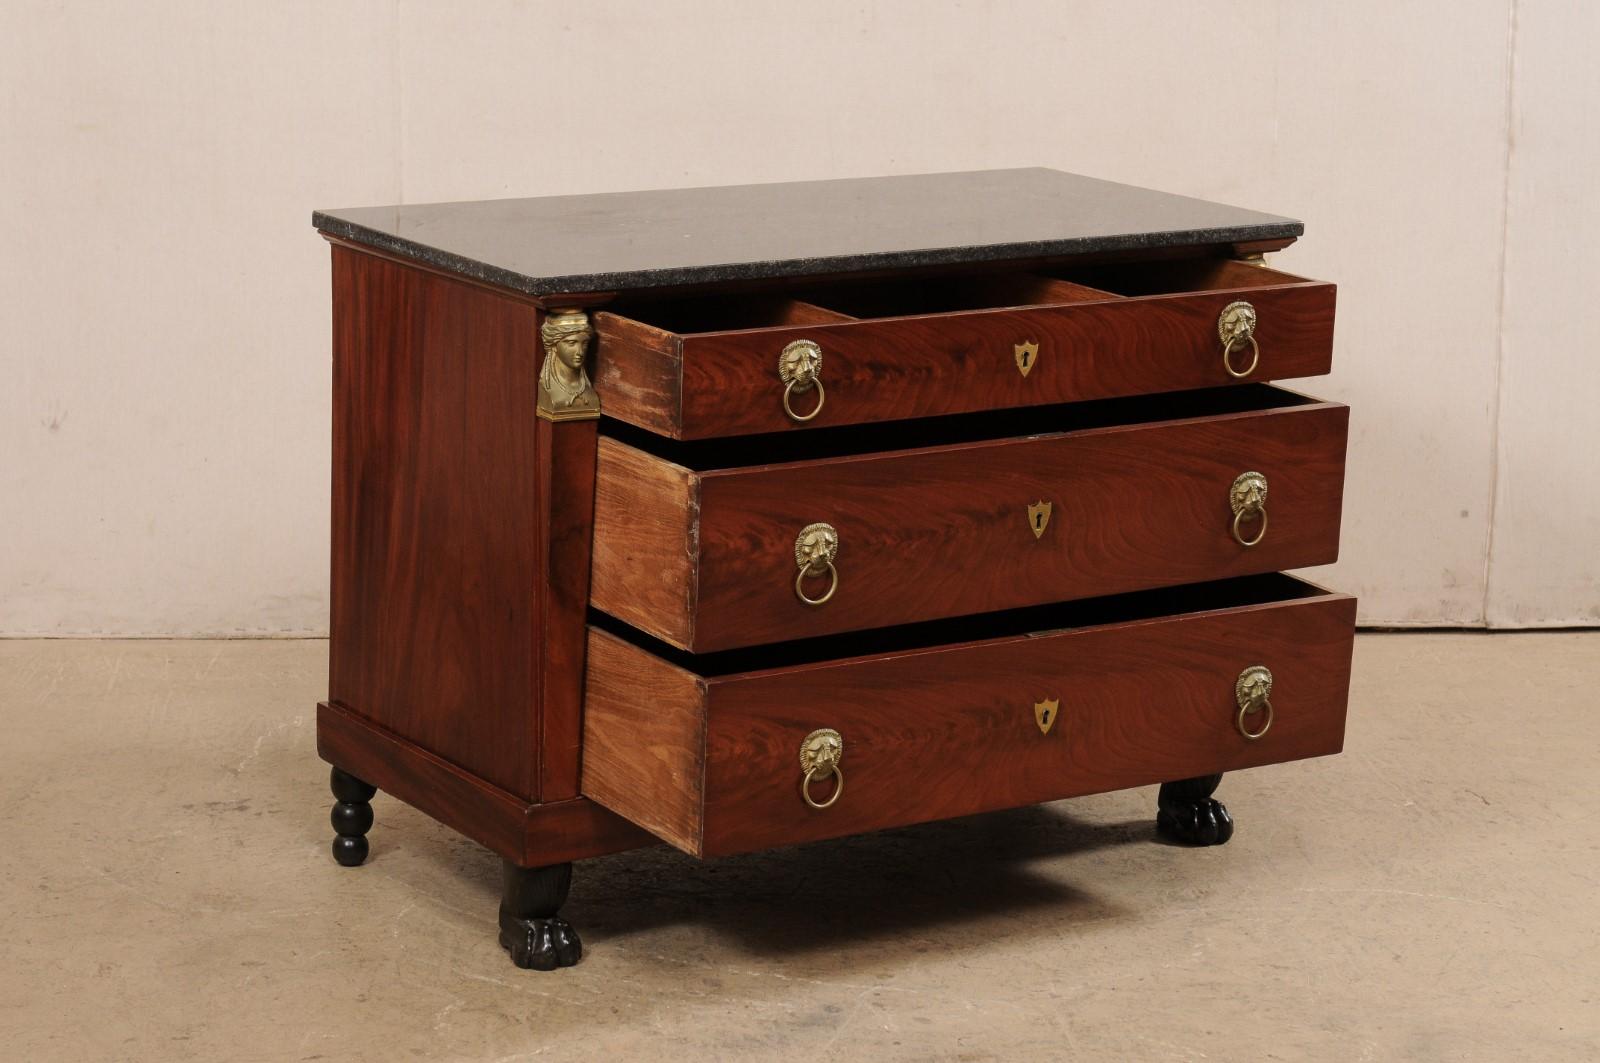 19th Century French Empire Period Commode w/Black Marble Top, Revival Accents, & Paw Feet For Sale